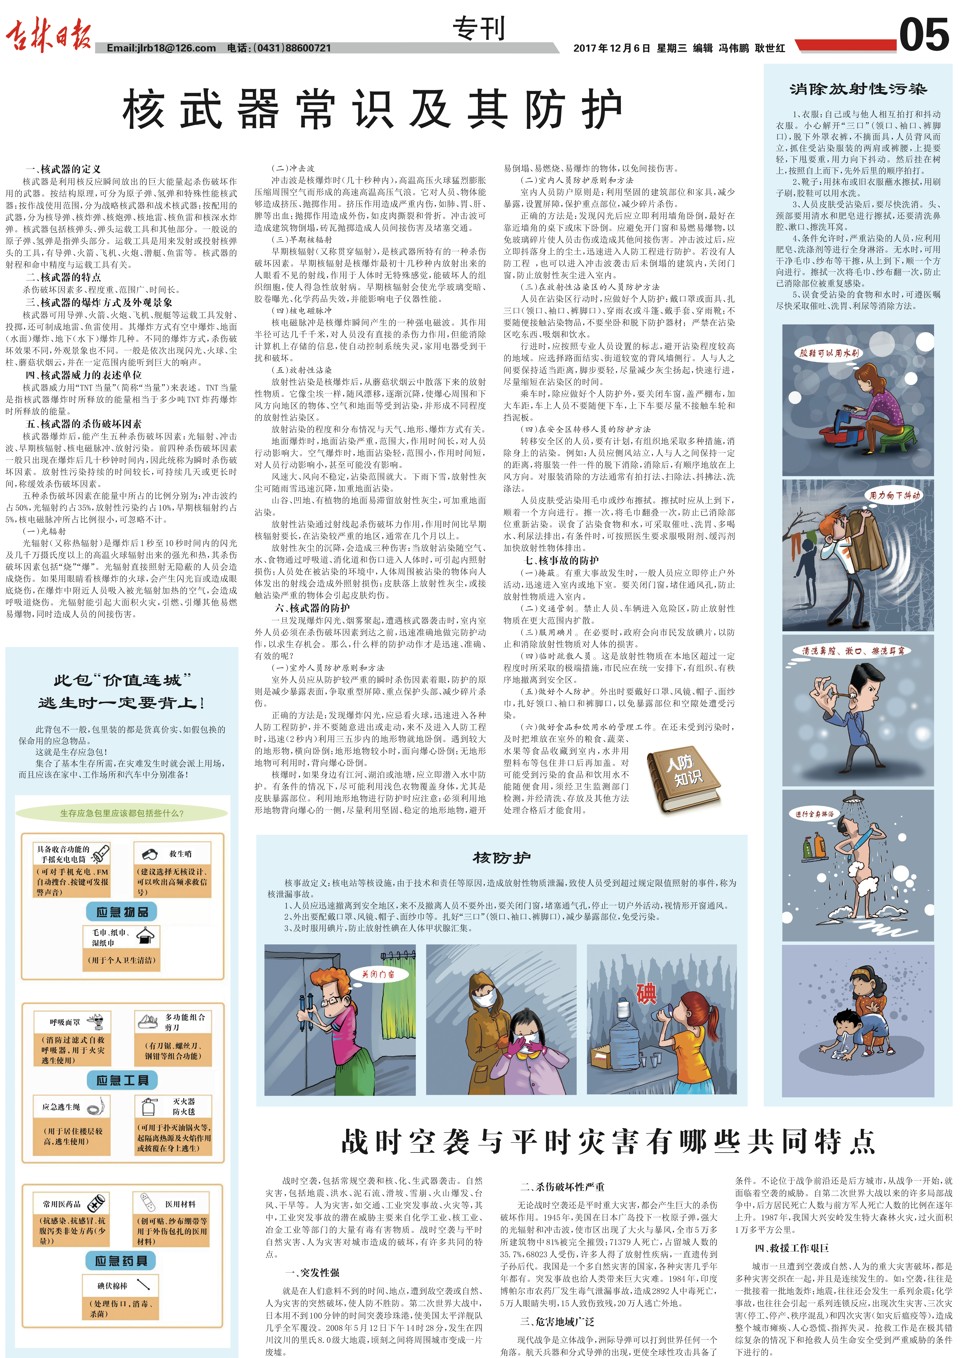 The Jilin Daily’s spread on nuclear attacks. Click to enlarge